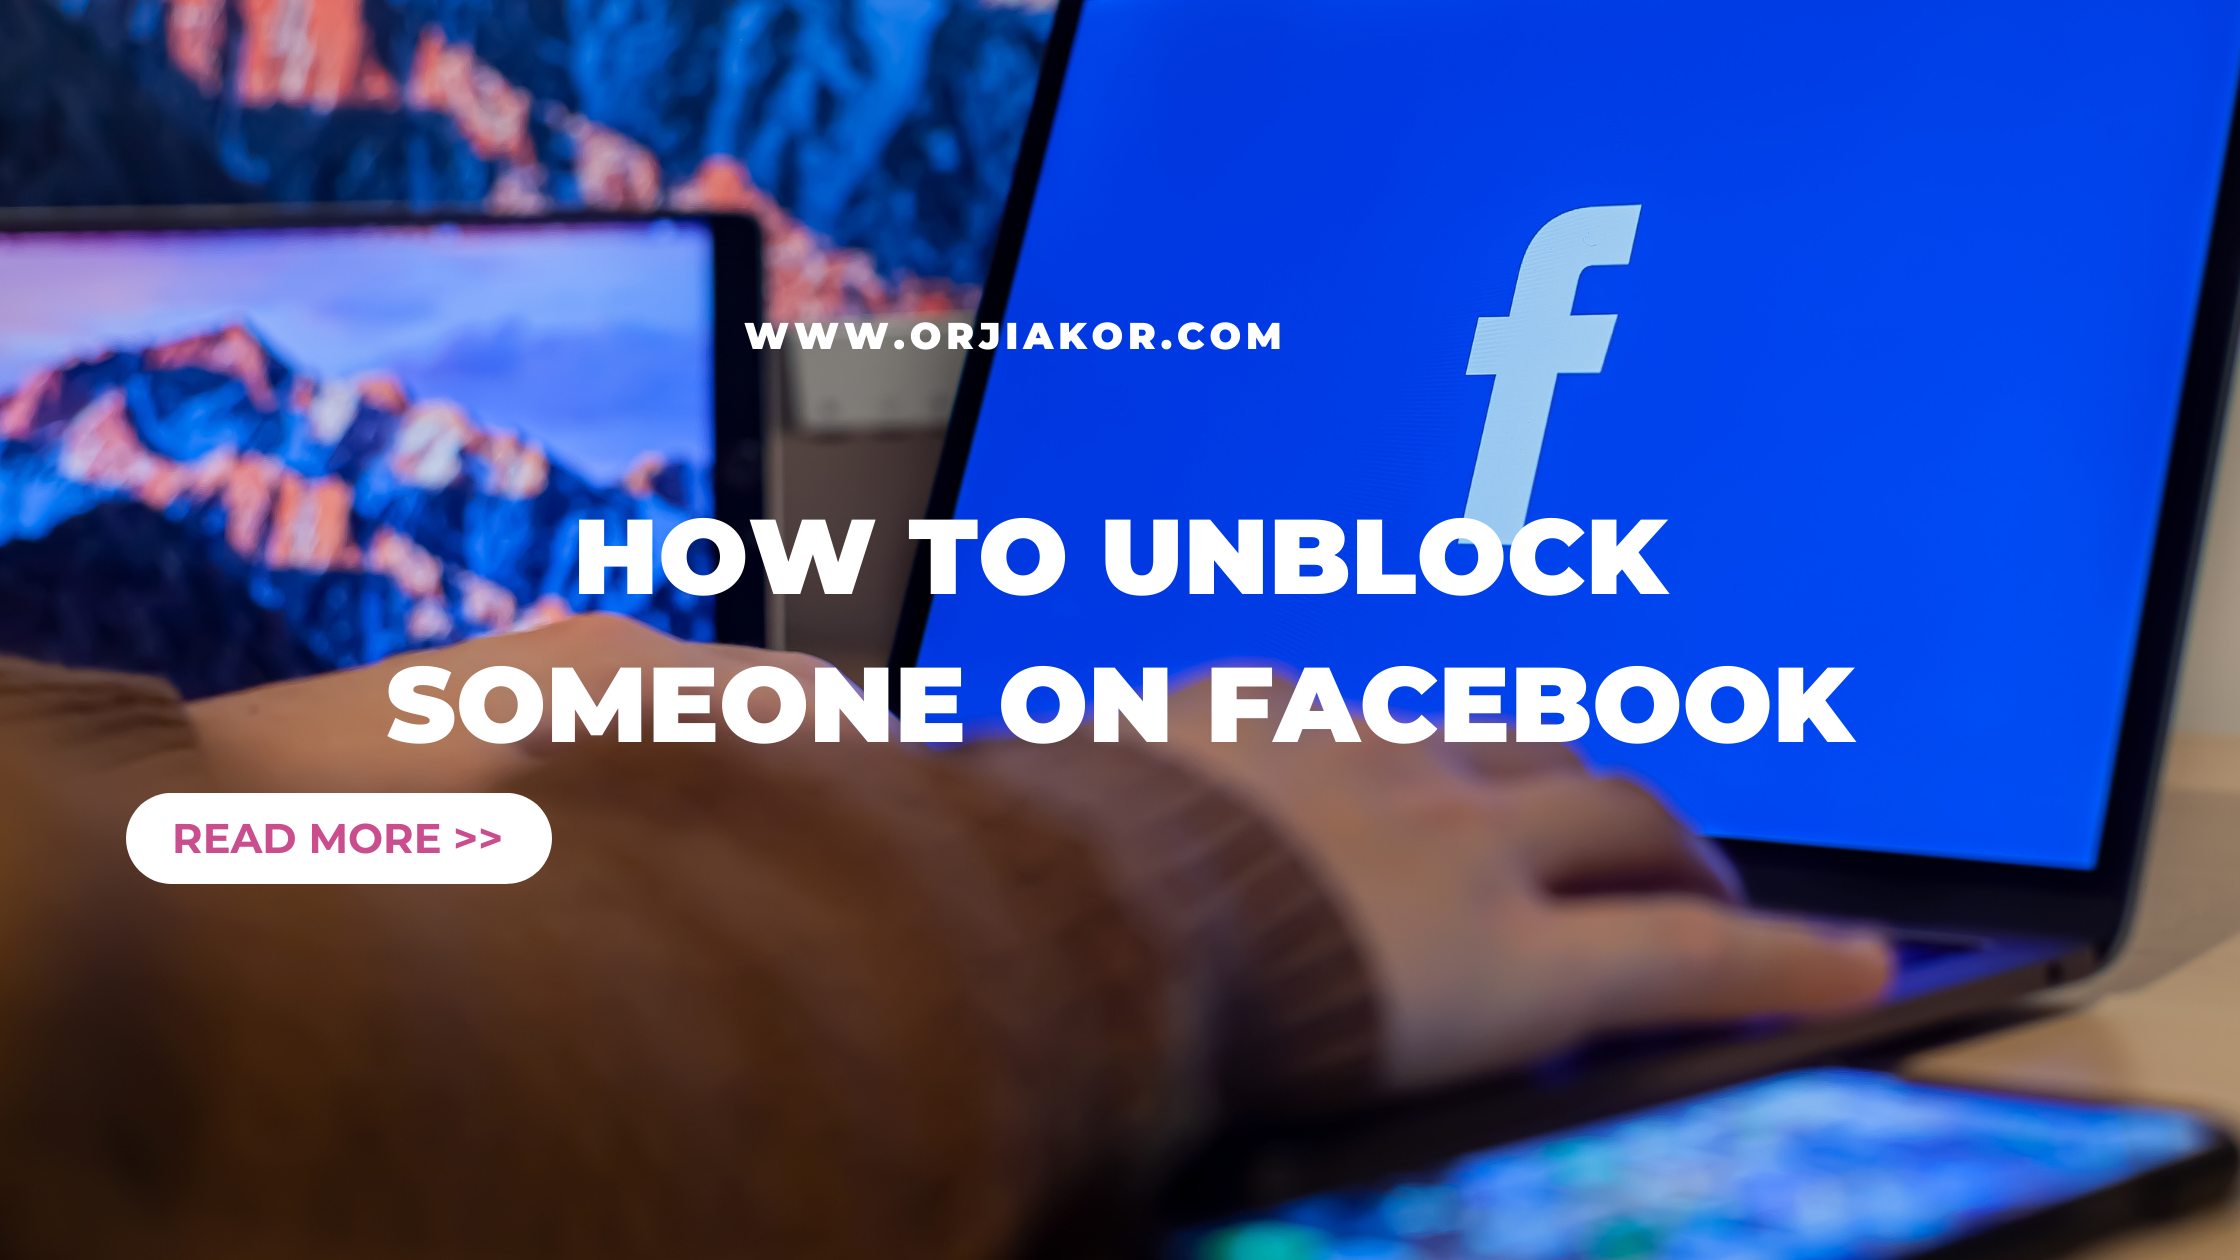 How To Unblock Someone On Facebook